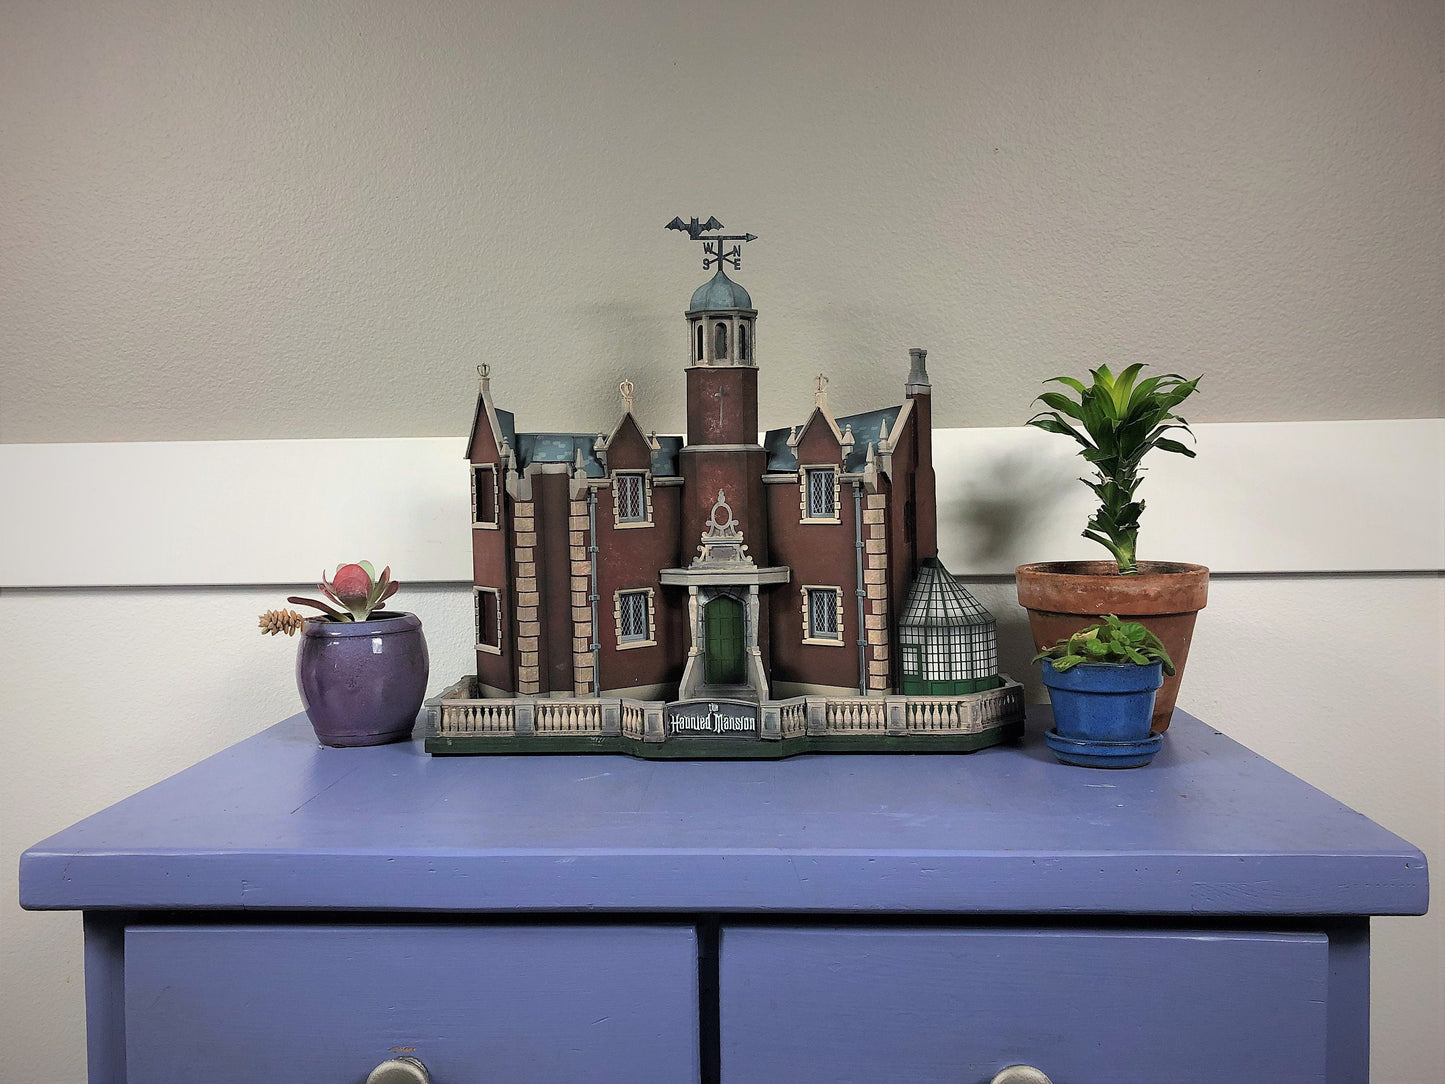 Haunted Mansion scale model